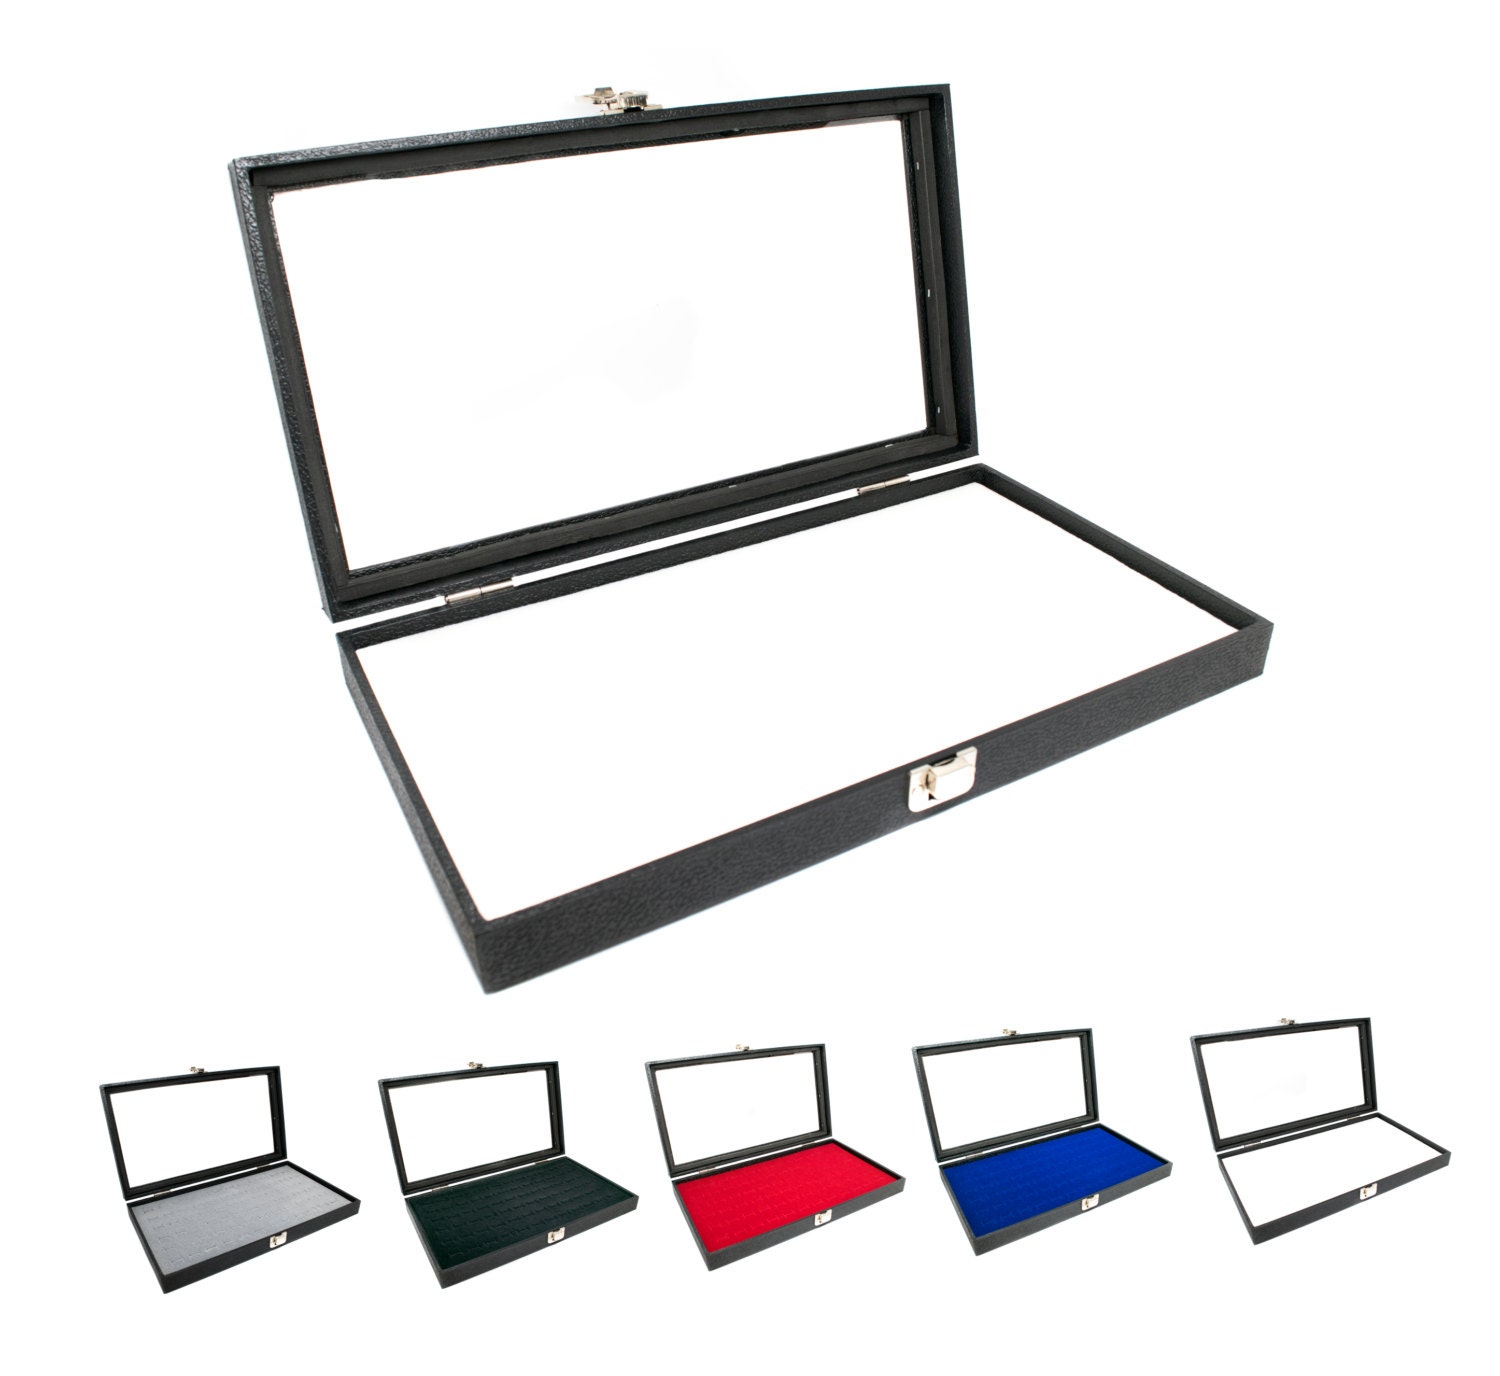 Wall Hanging Acrylic Mini Brands Display Case 100 Openings 